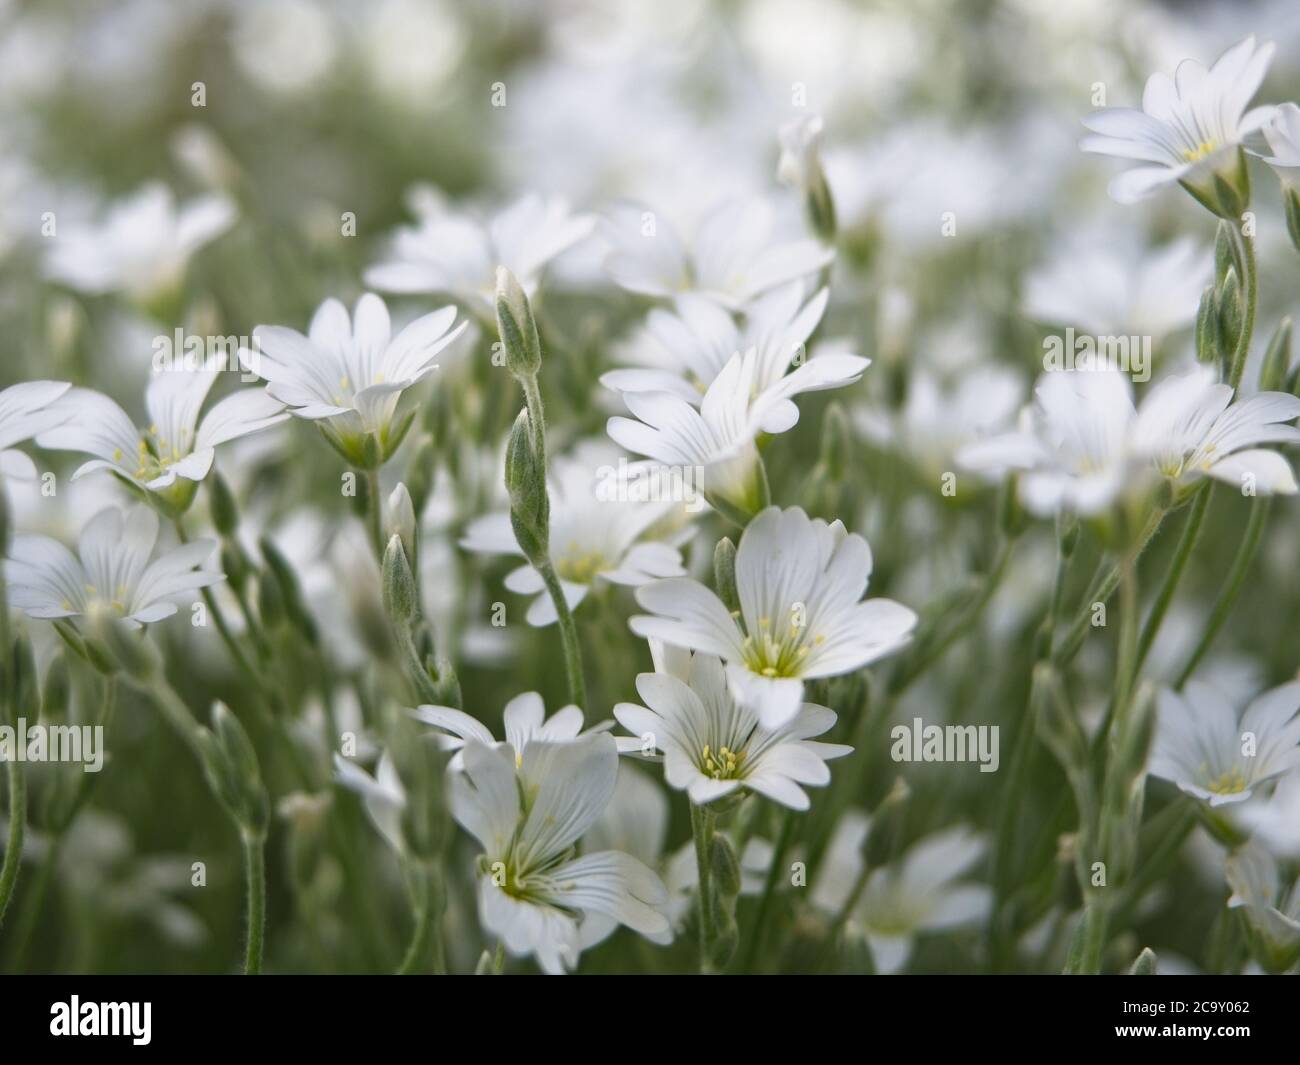 Close-up of chickweed flowers. Blooming white flowers in the spring. Cerastium arvense. Selective focus, blurred background. Stock Photo